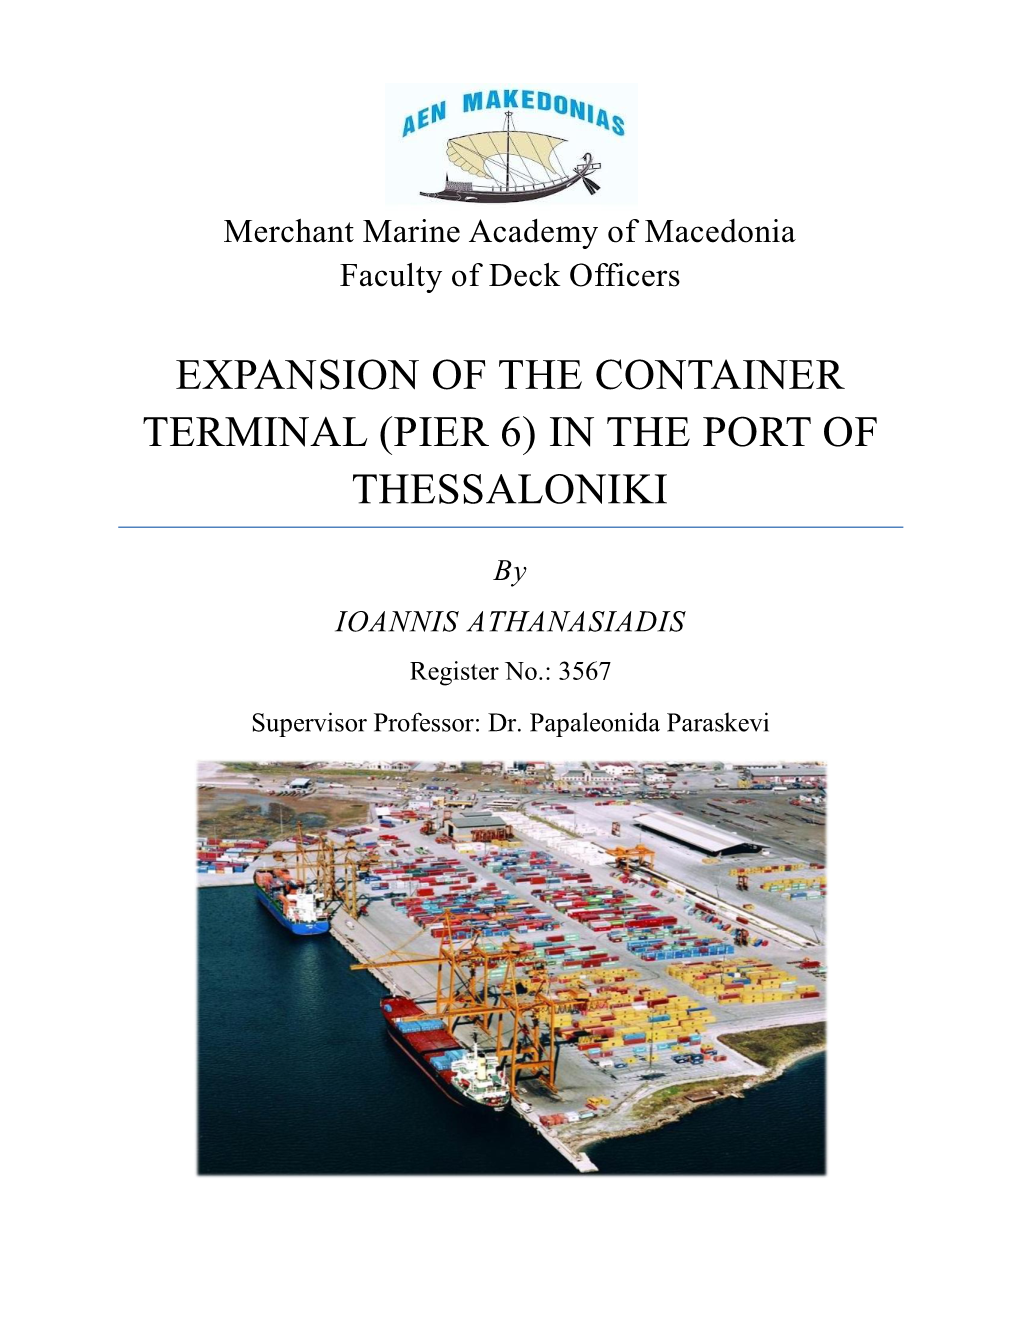 Expansion of the Container Terminal (Pier 6) in the Port of Thessaloniki